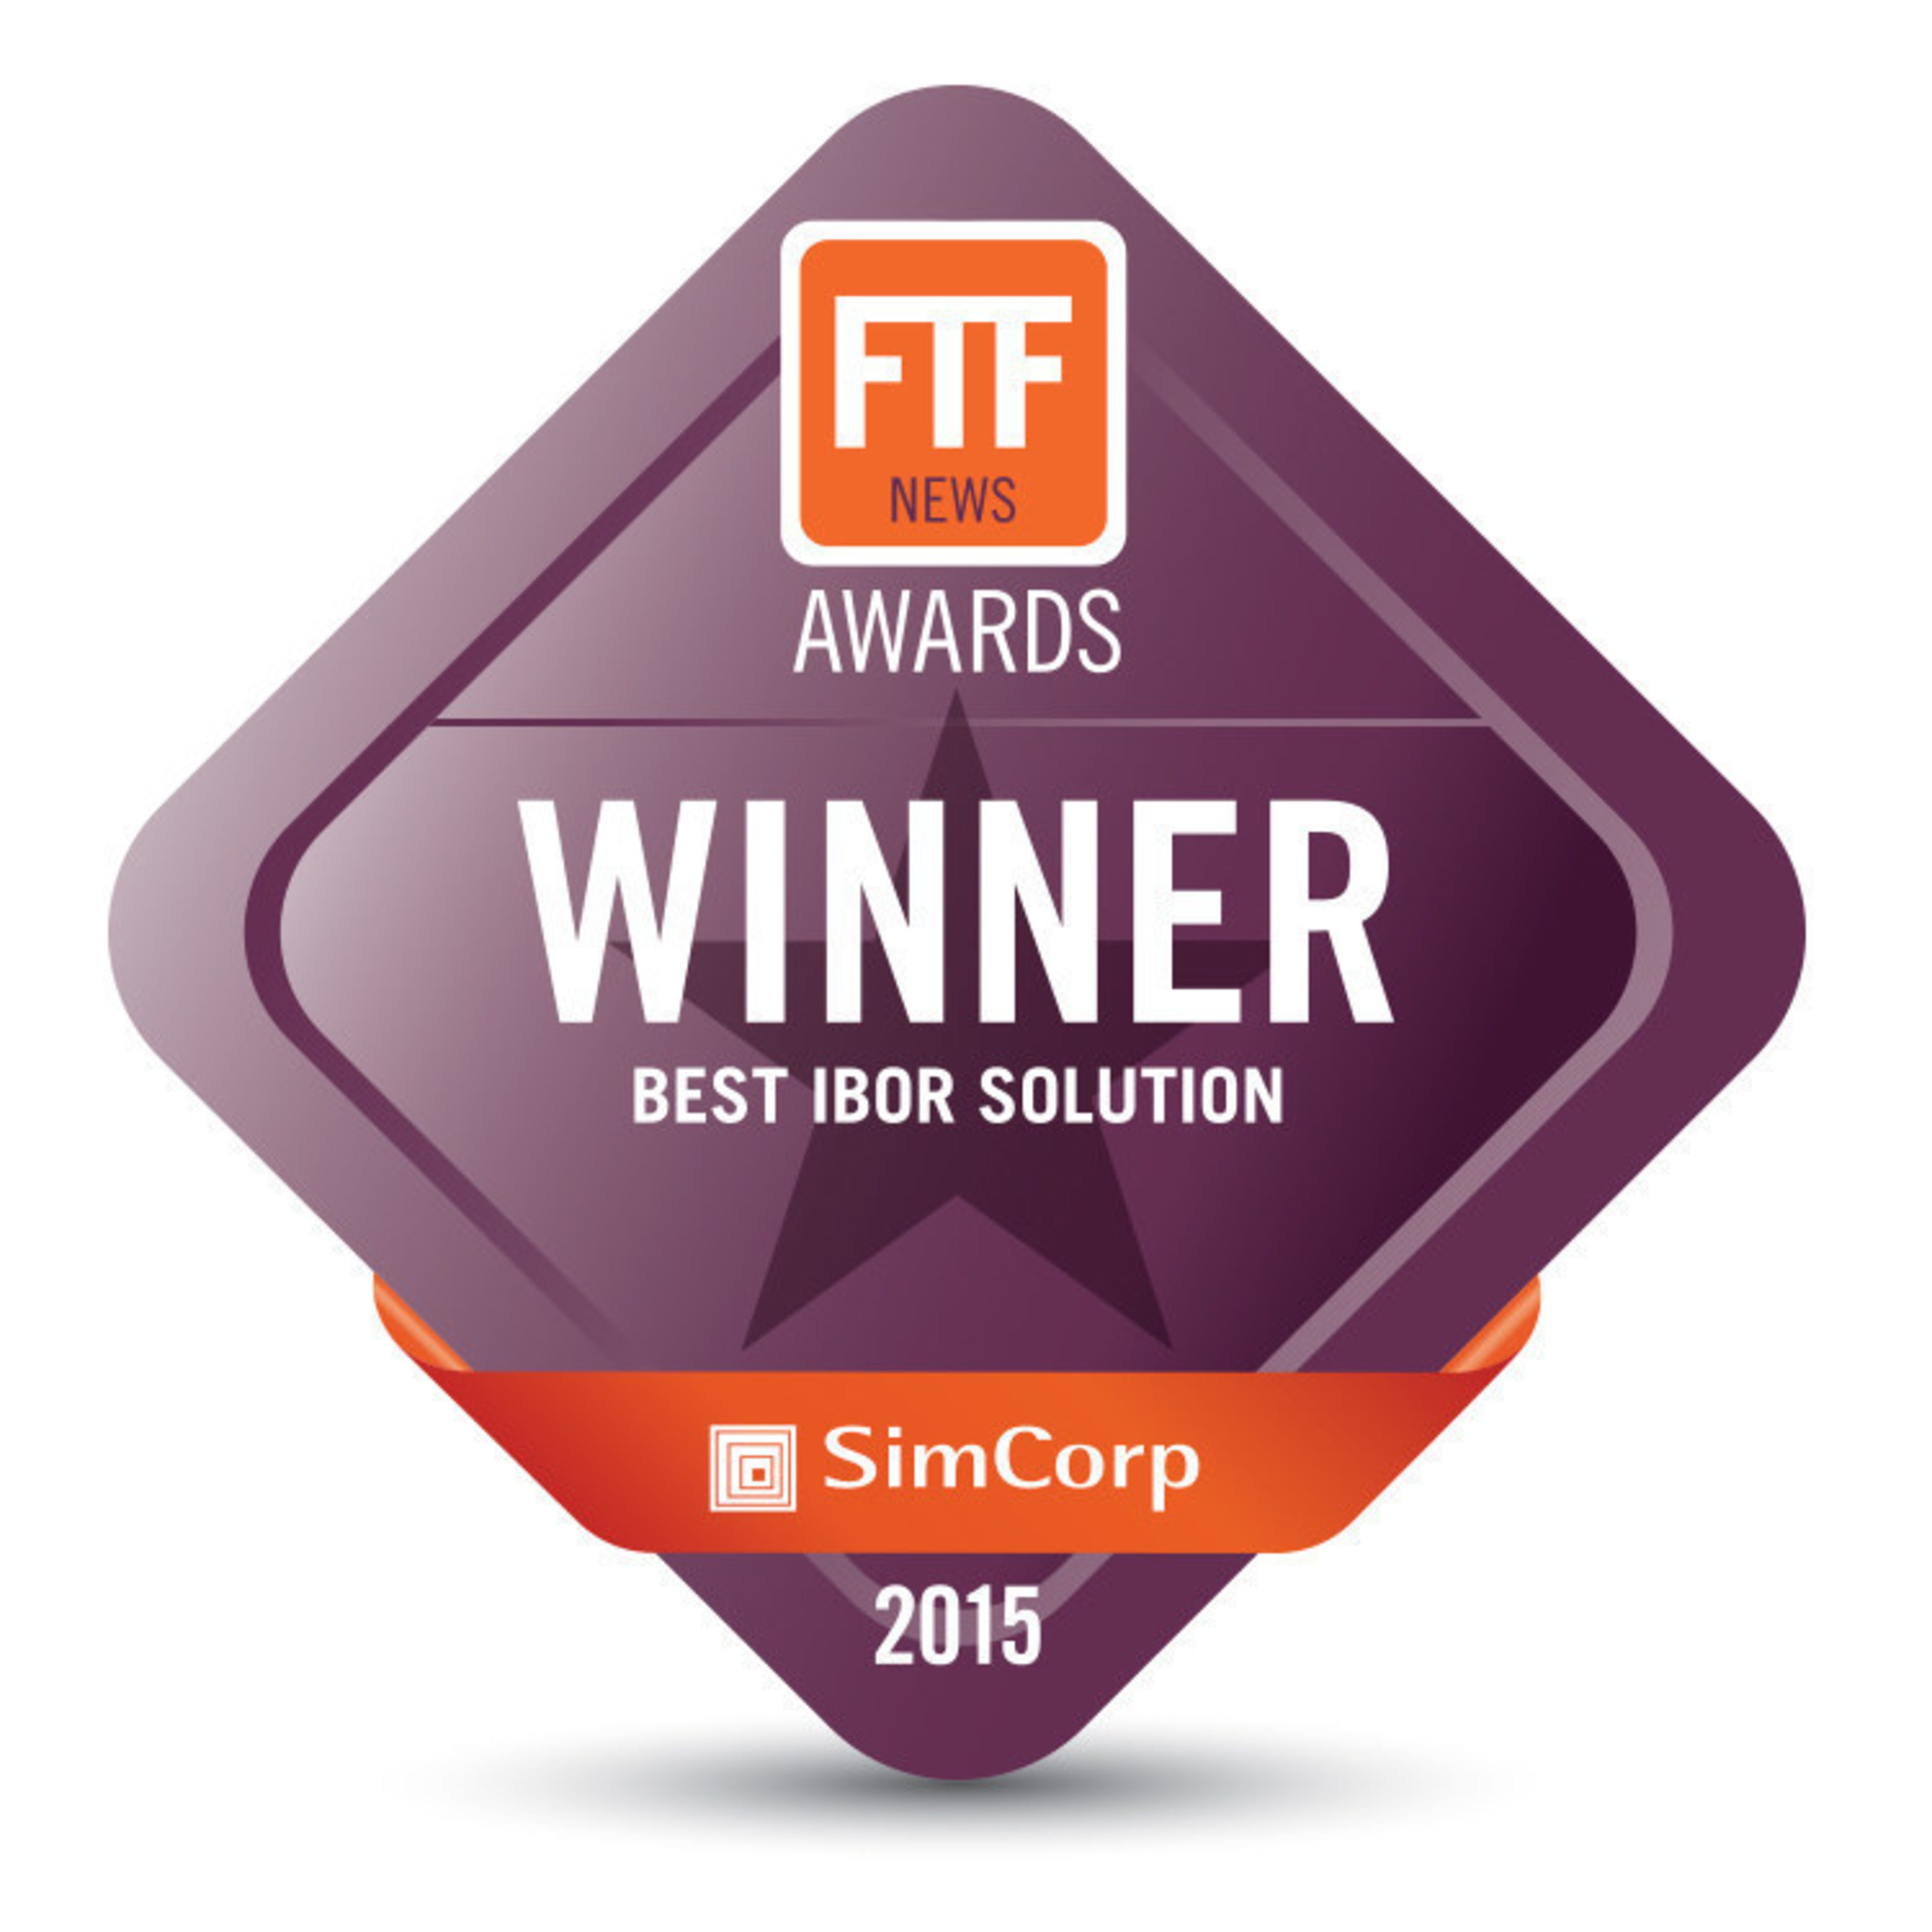 SimCorp, 'Best IBOR Solution,' FTF Awards 2015